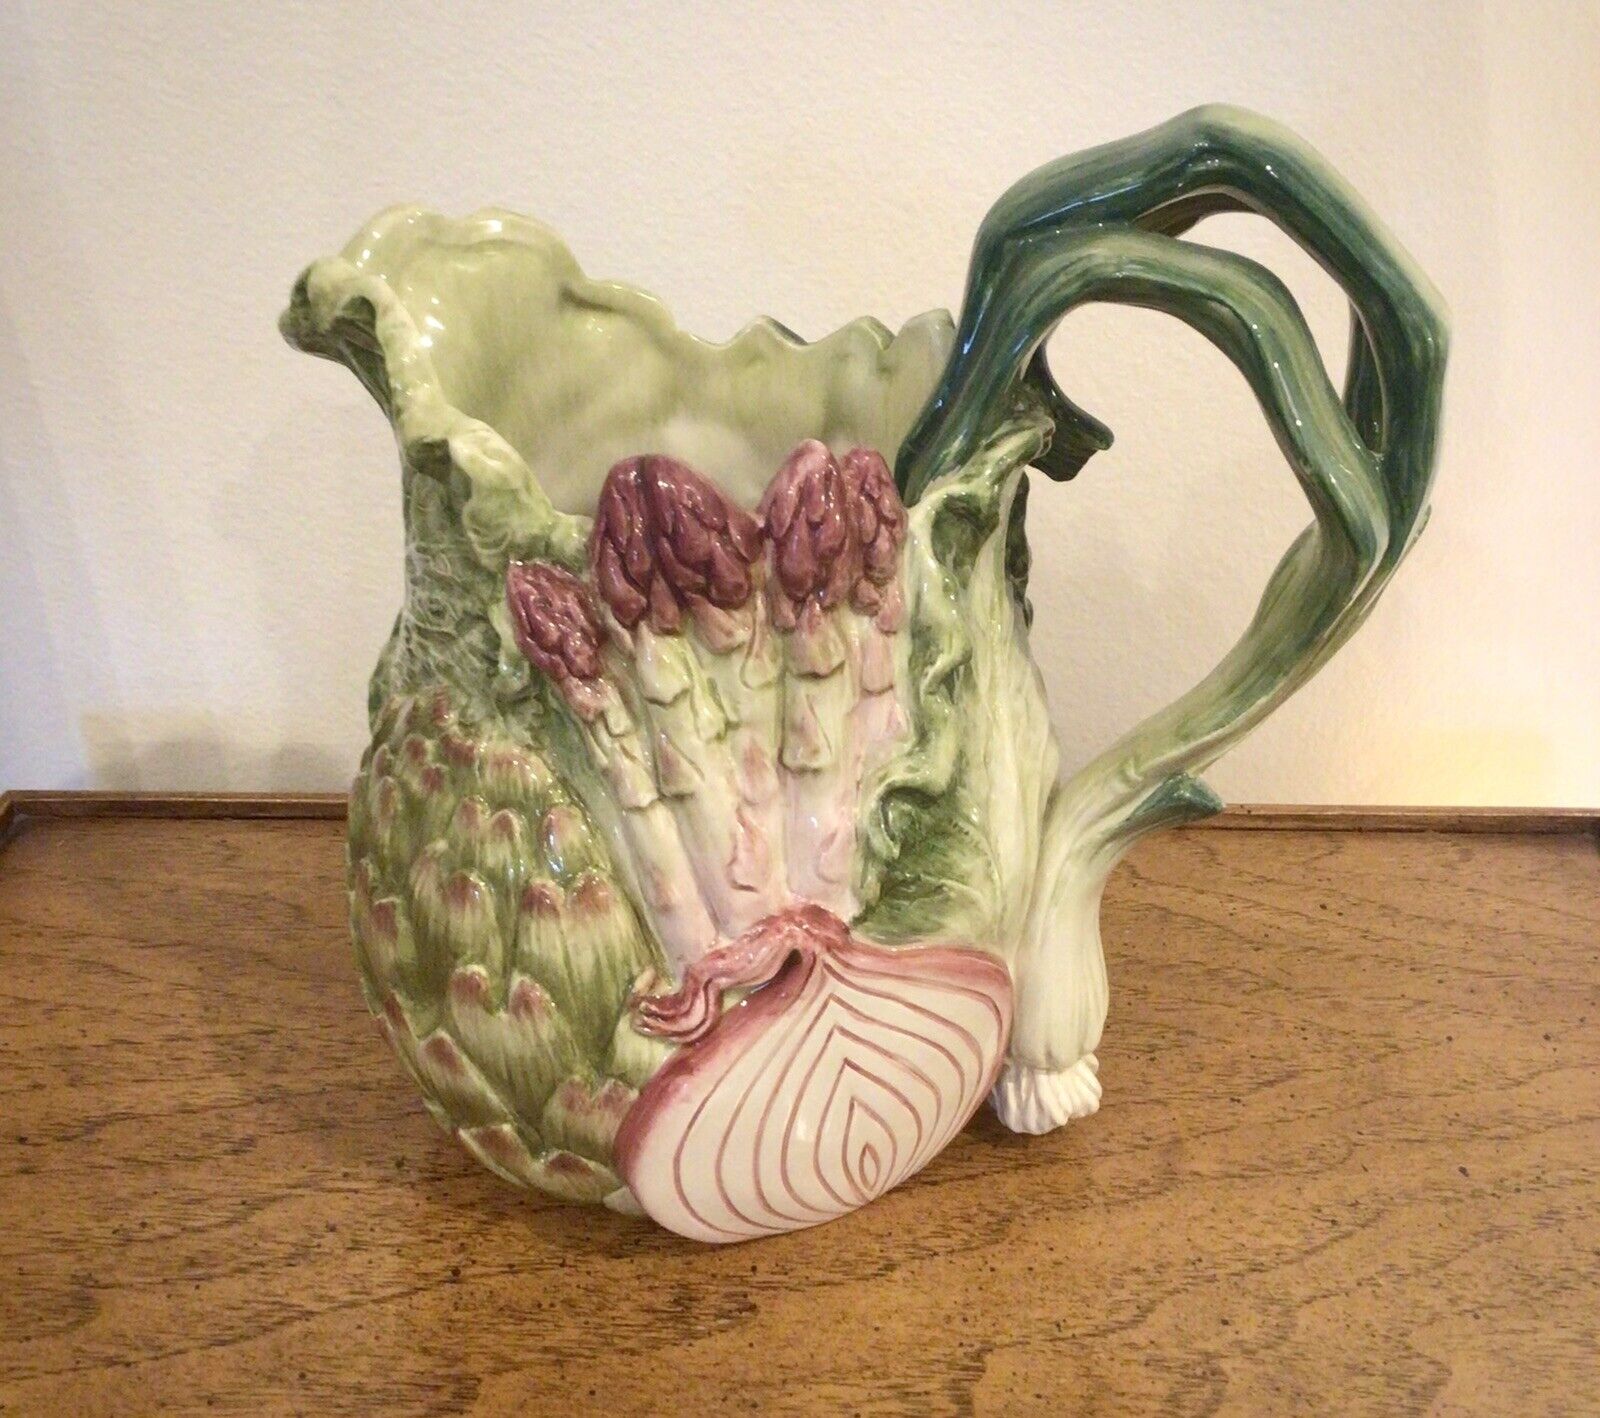 FITZ AND FLOYD FRENCH MARKET PITCHER - Good Pre-Owned Condition,See All Photos